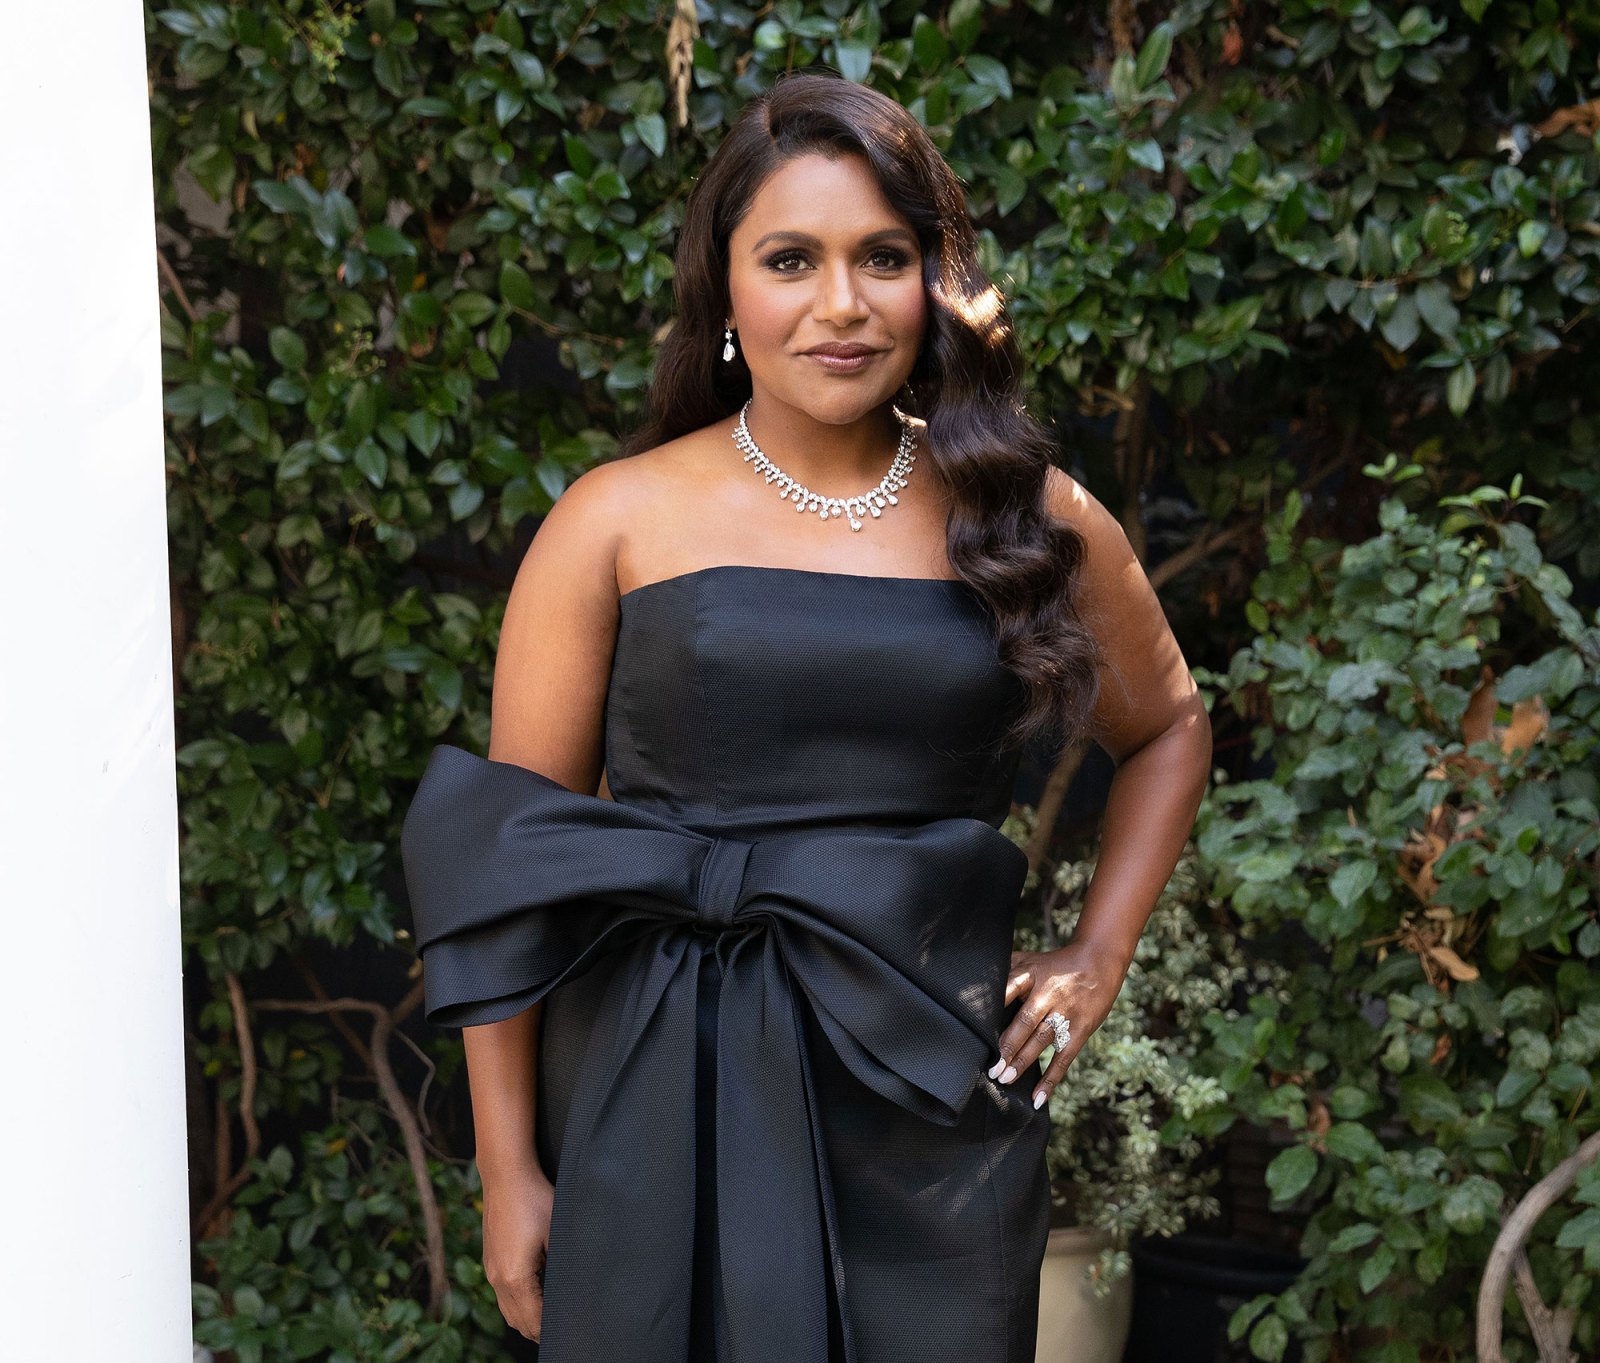 Mindy Kaling’s Rare Family Photos With Her Children